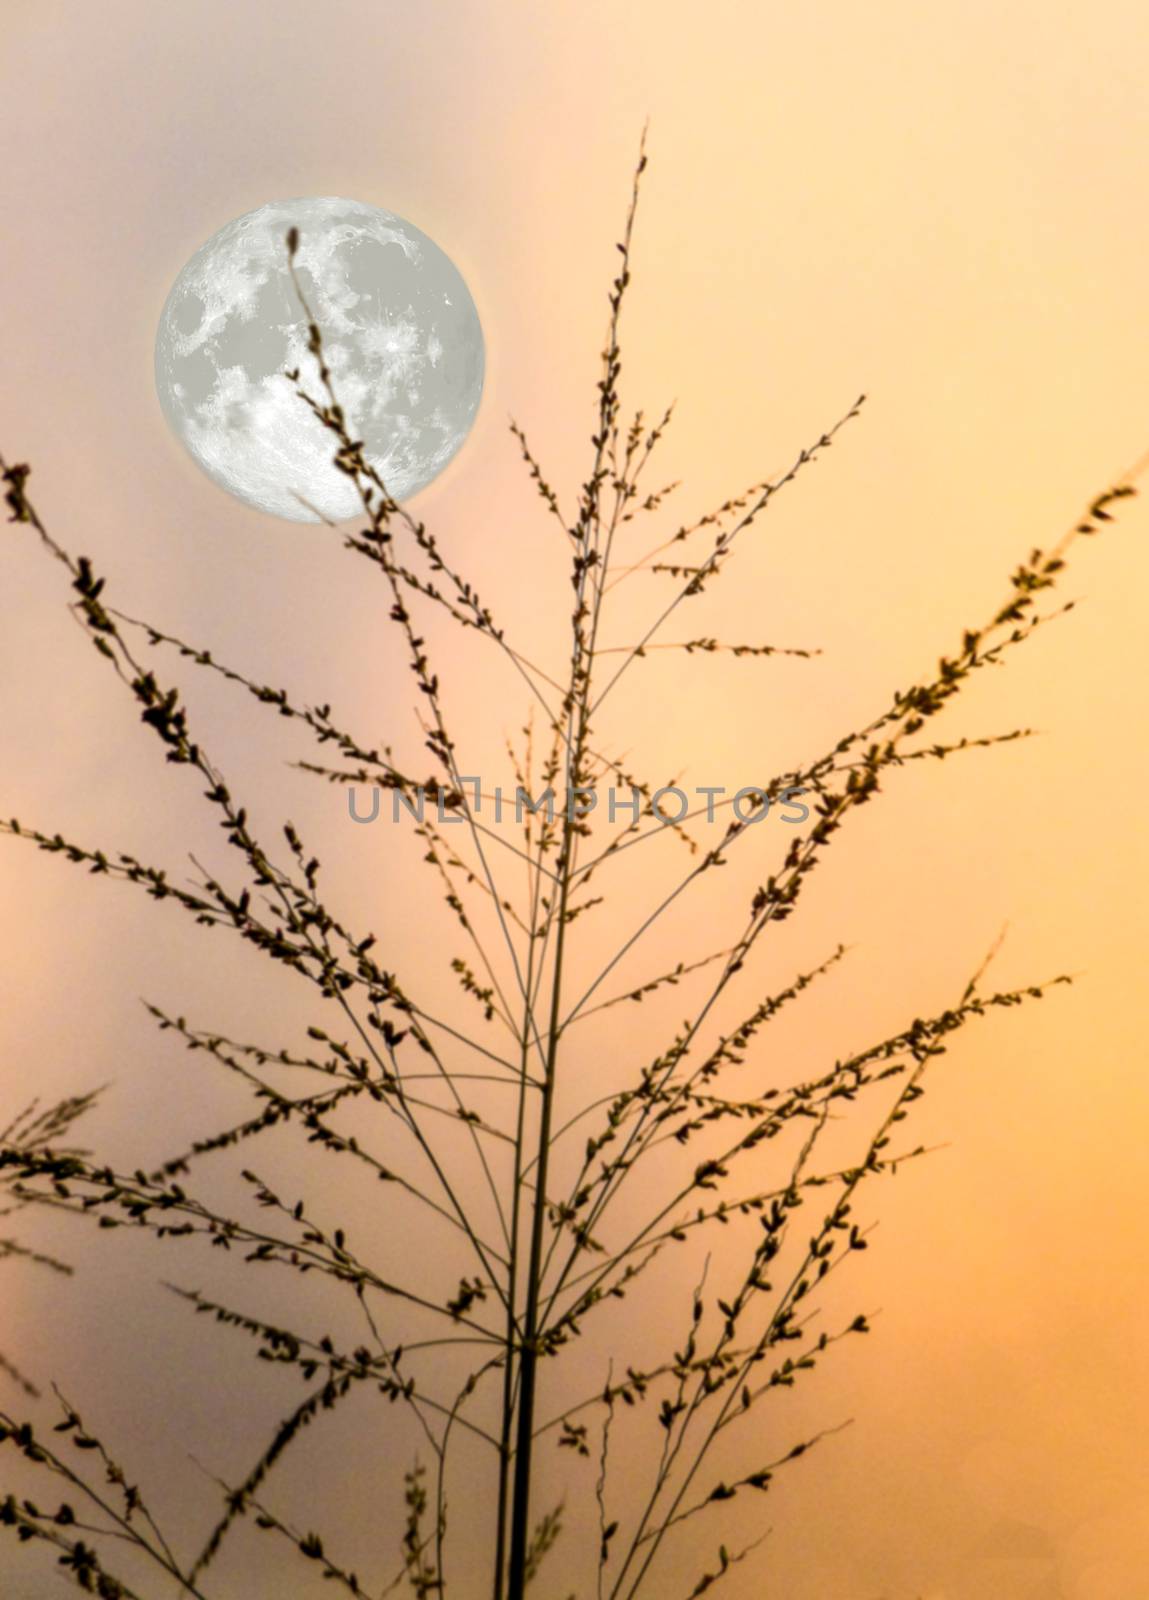 full moon and silhouette grass in evening by Darkfox